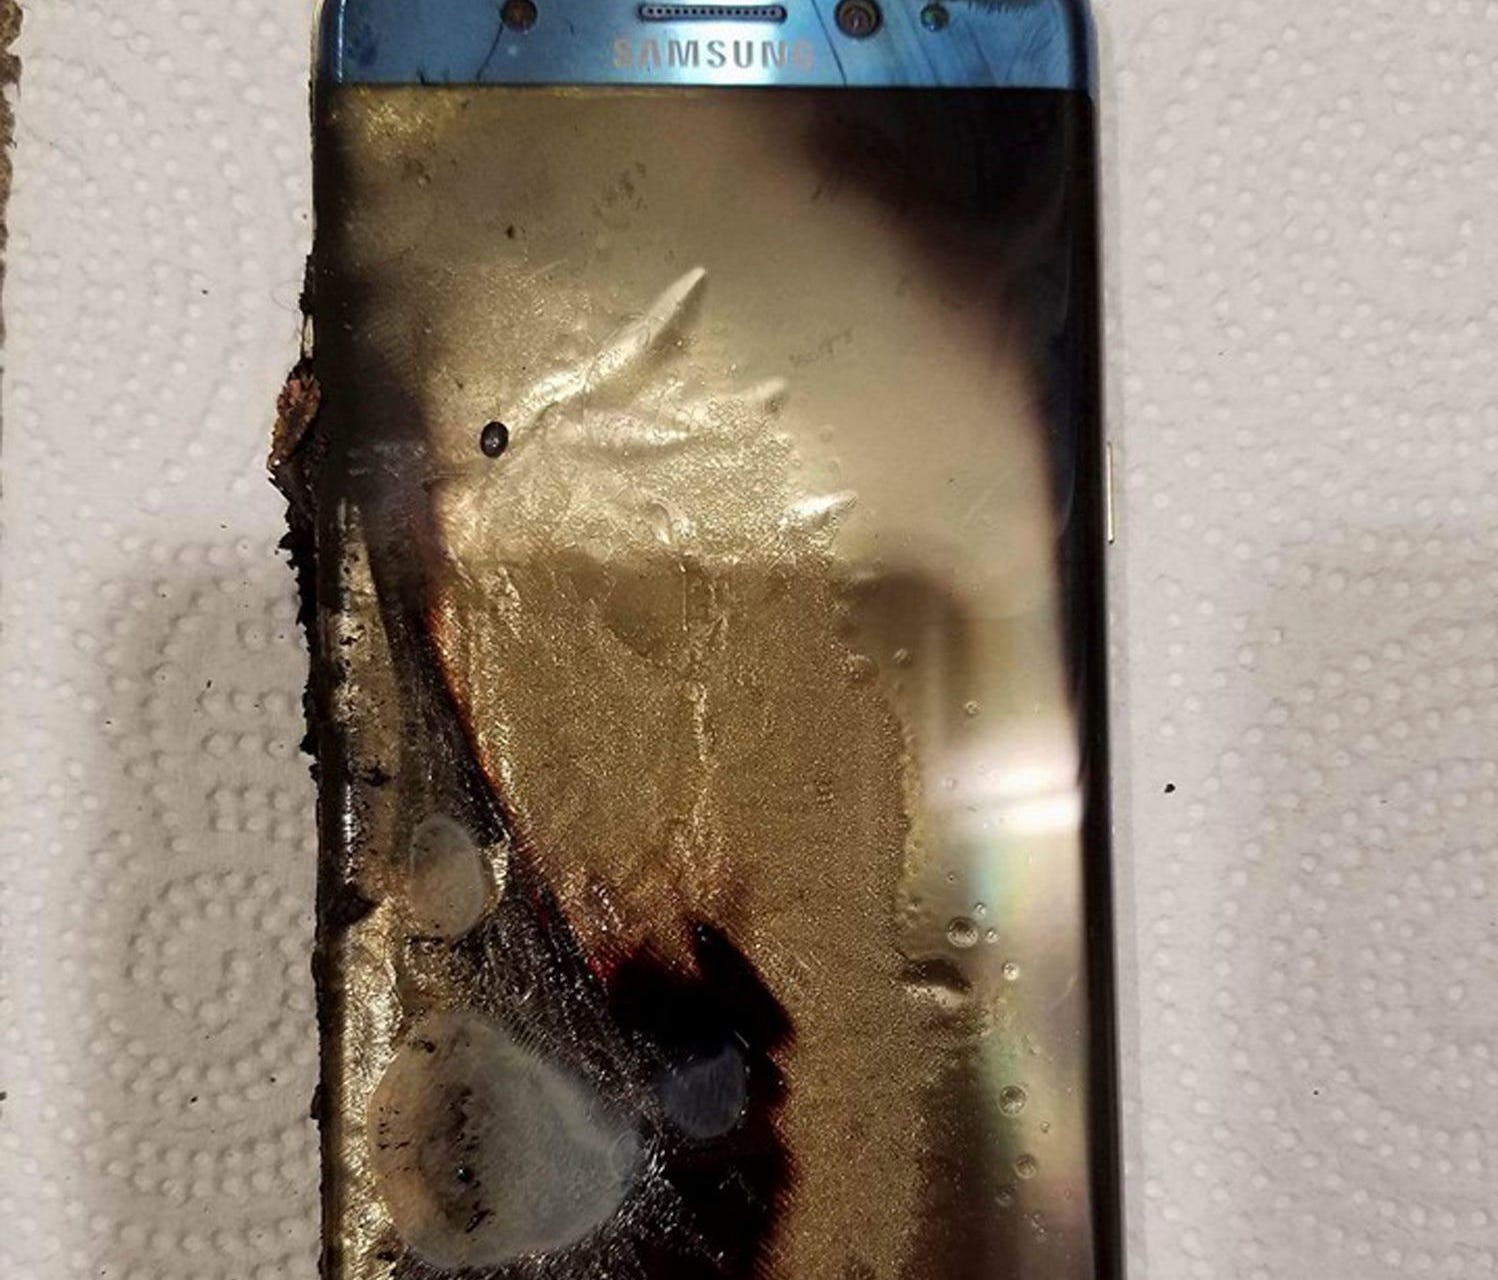 This Sept. 8, 2016, photo, shows a damaged Samsung Galaxy Note 7, in Marion, Ill., belonging to Joni Gantz Barwick, who was woken up at 3 a.m. by smoke and sparks from her Galaxy Note 7.